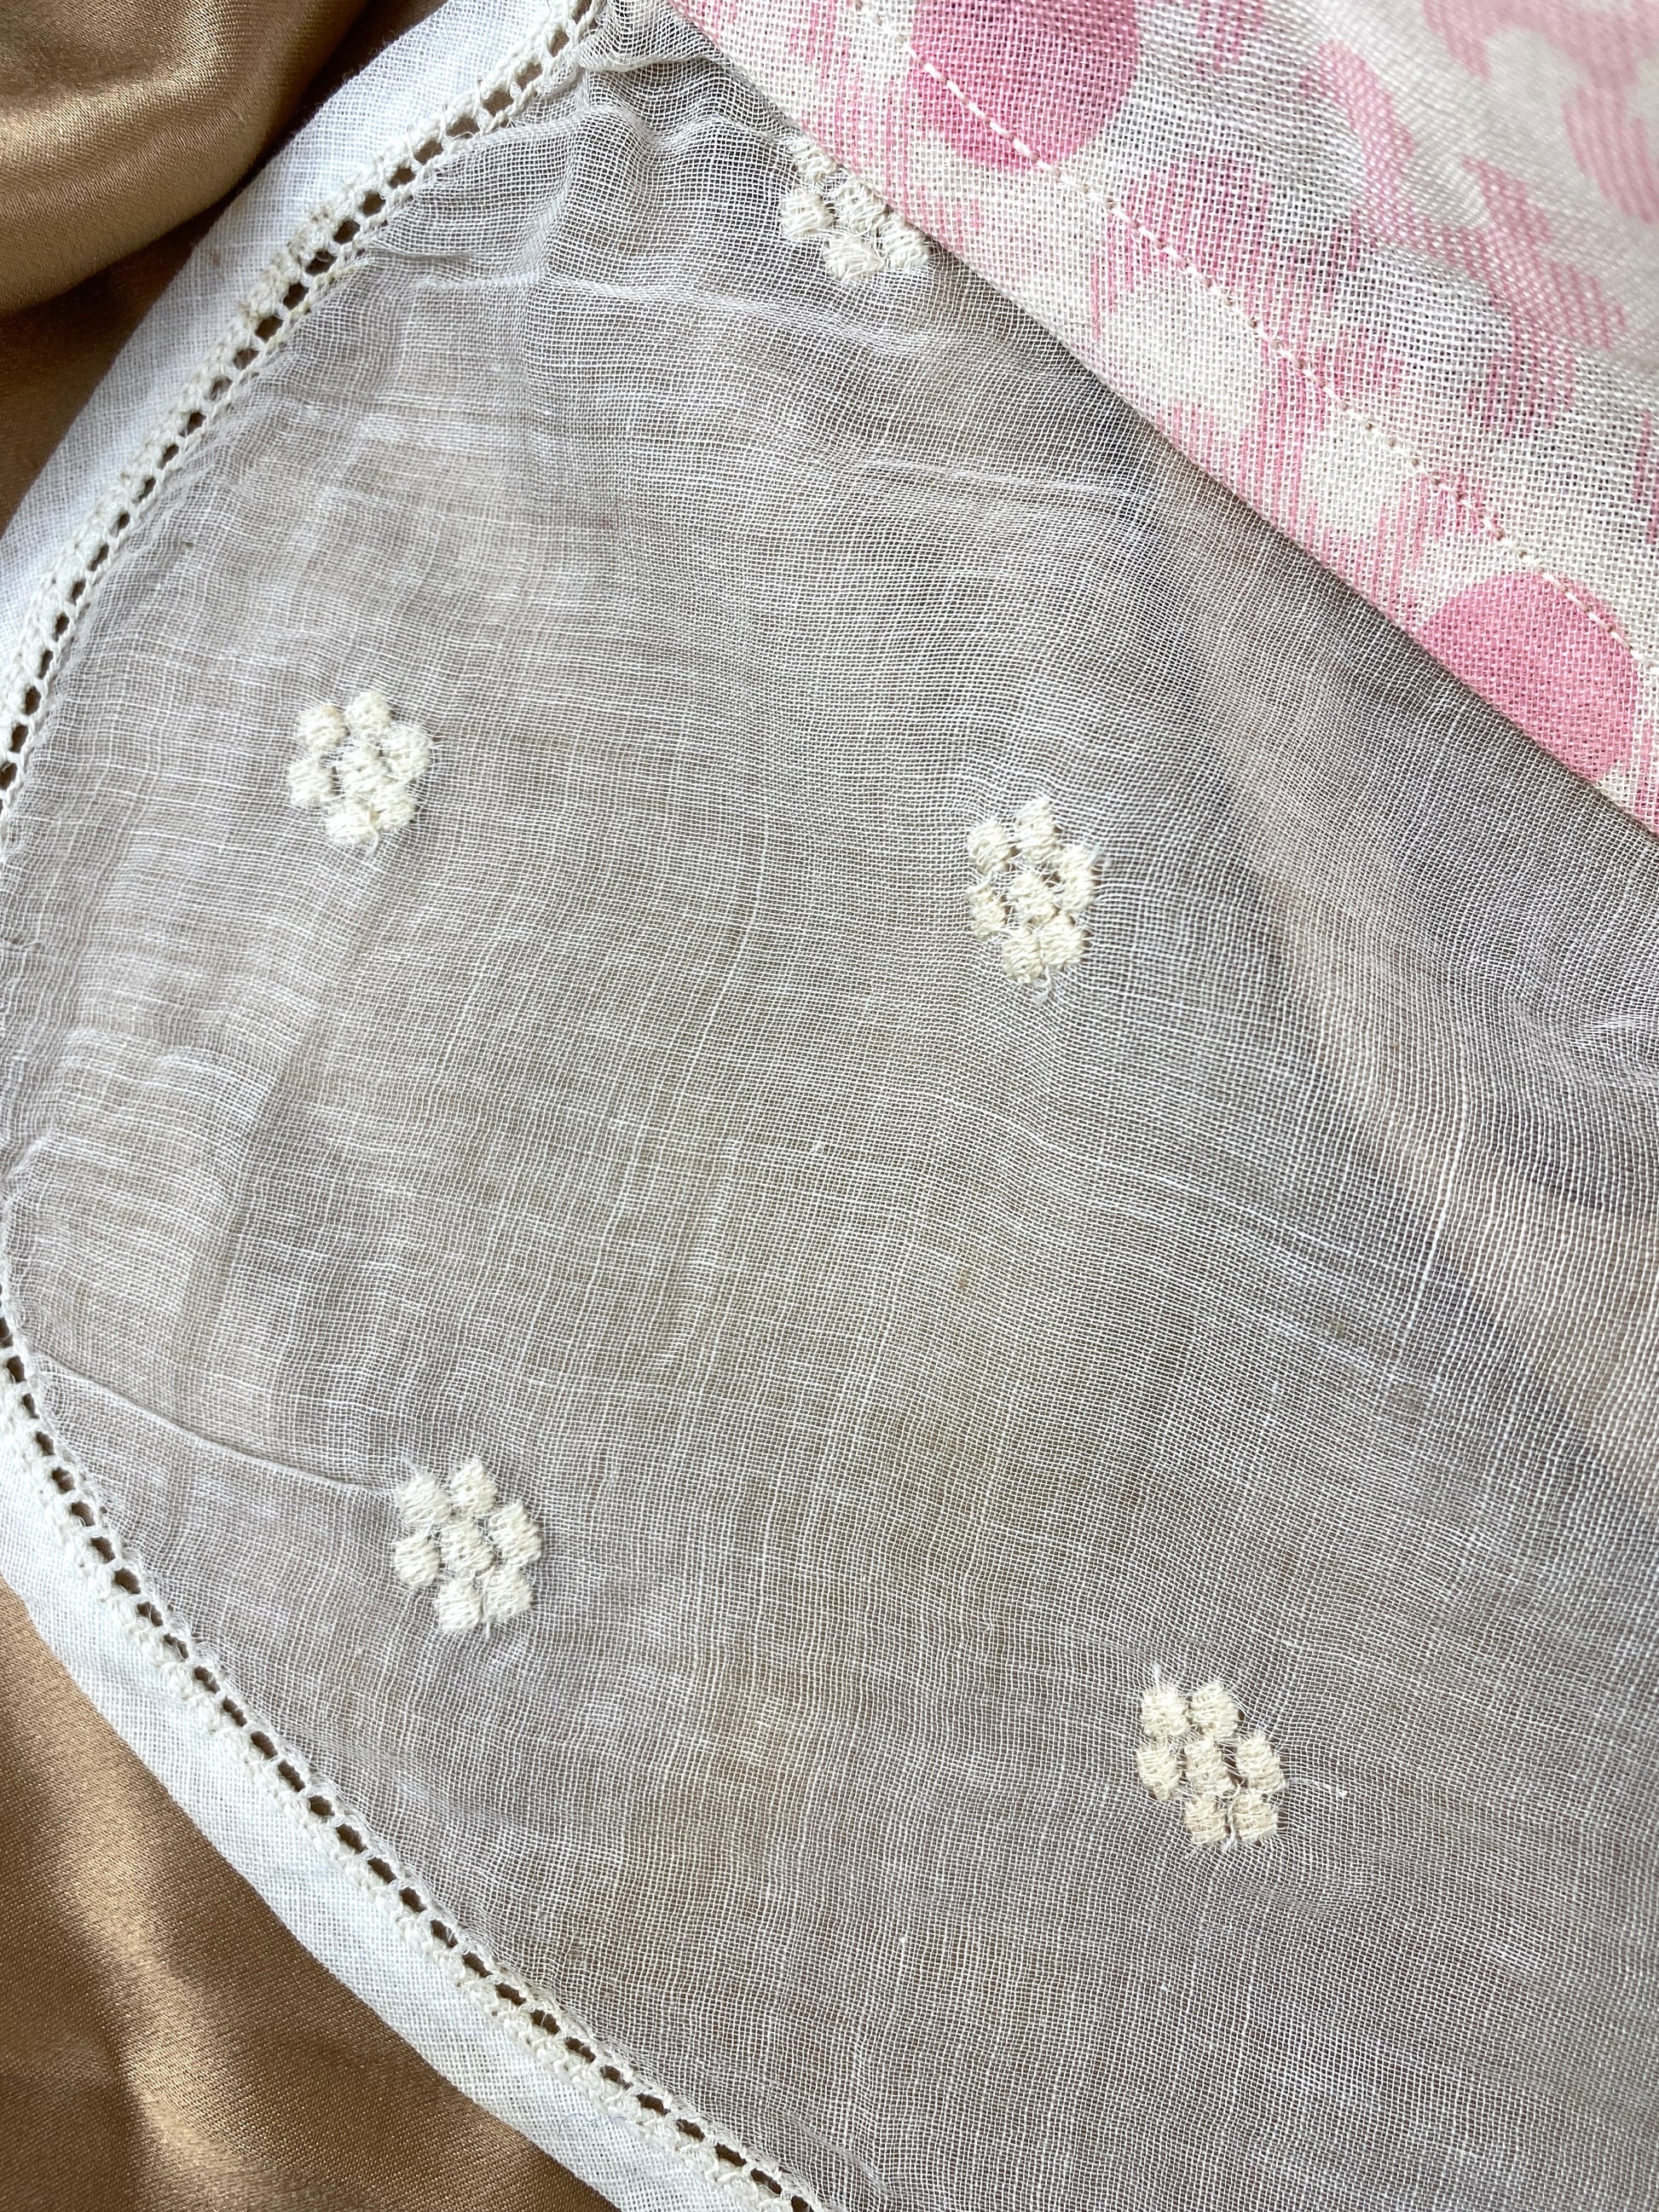 Vintage 1930s White & Pink Embroidered Voile Collar With Print